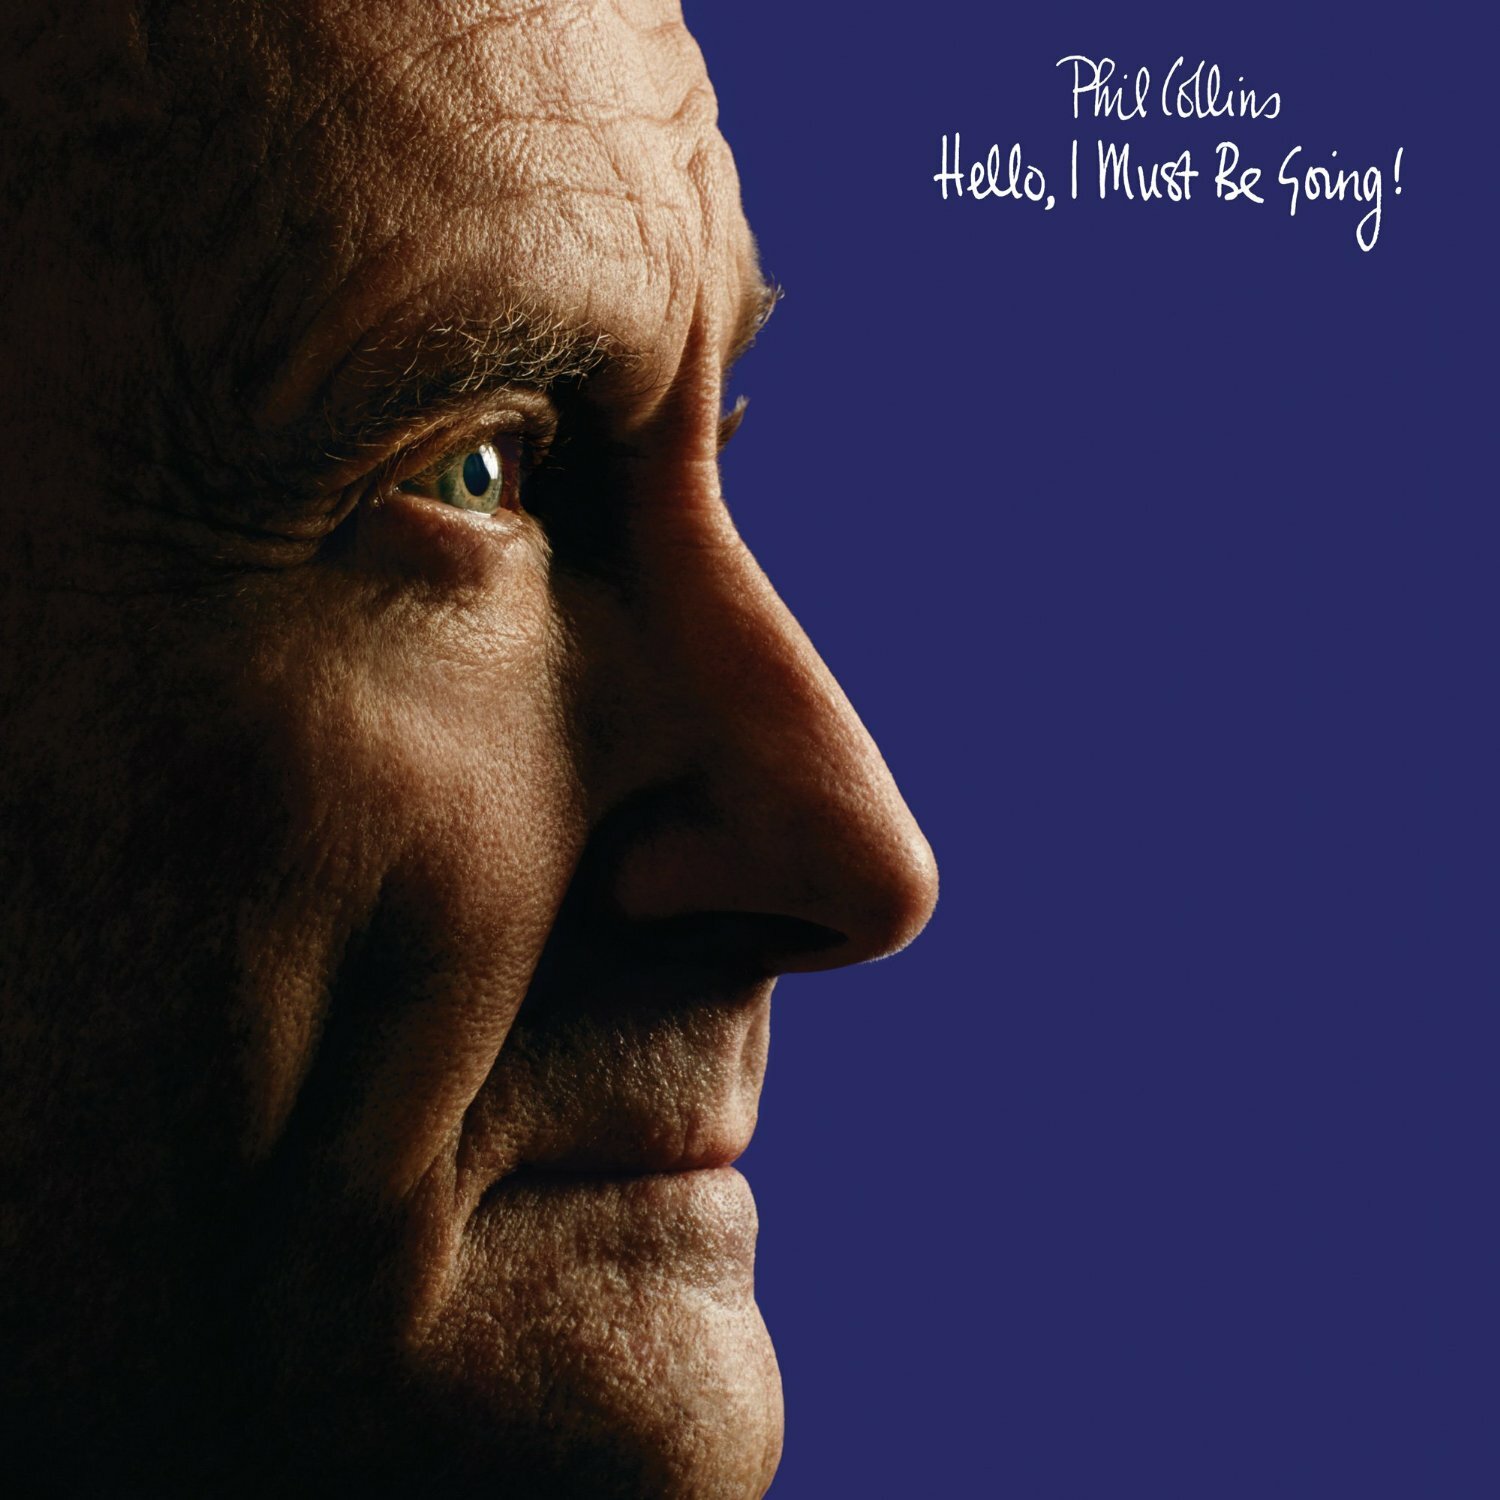 Phil Collins - Hello, I Must Be Going (2016)